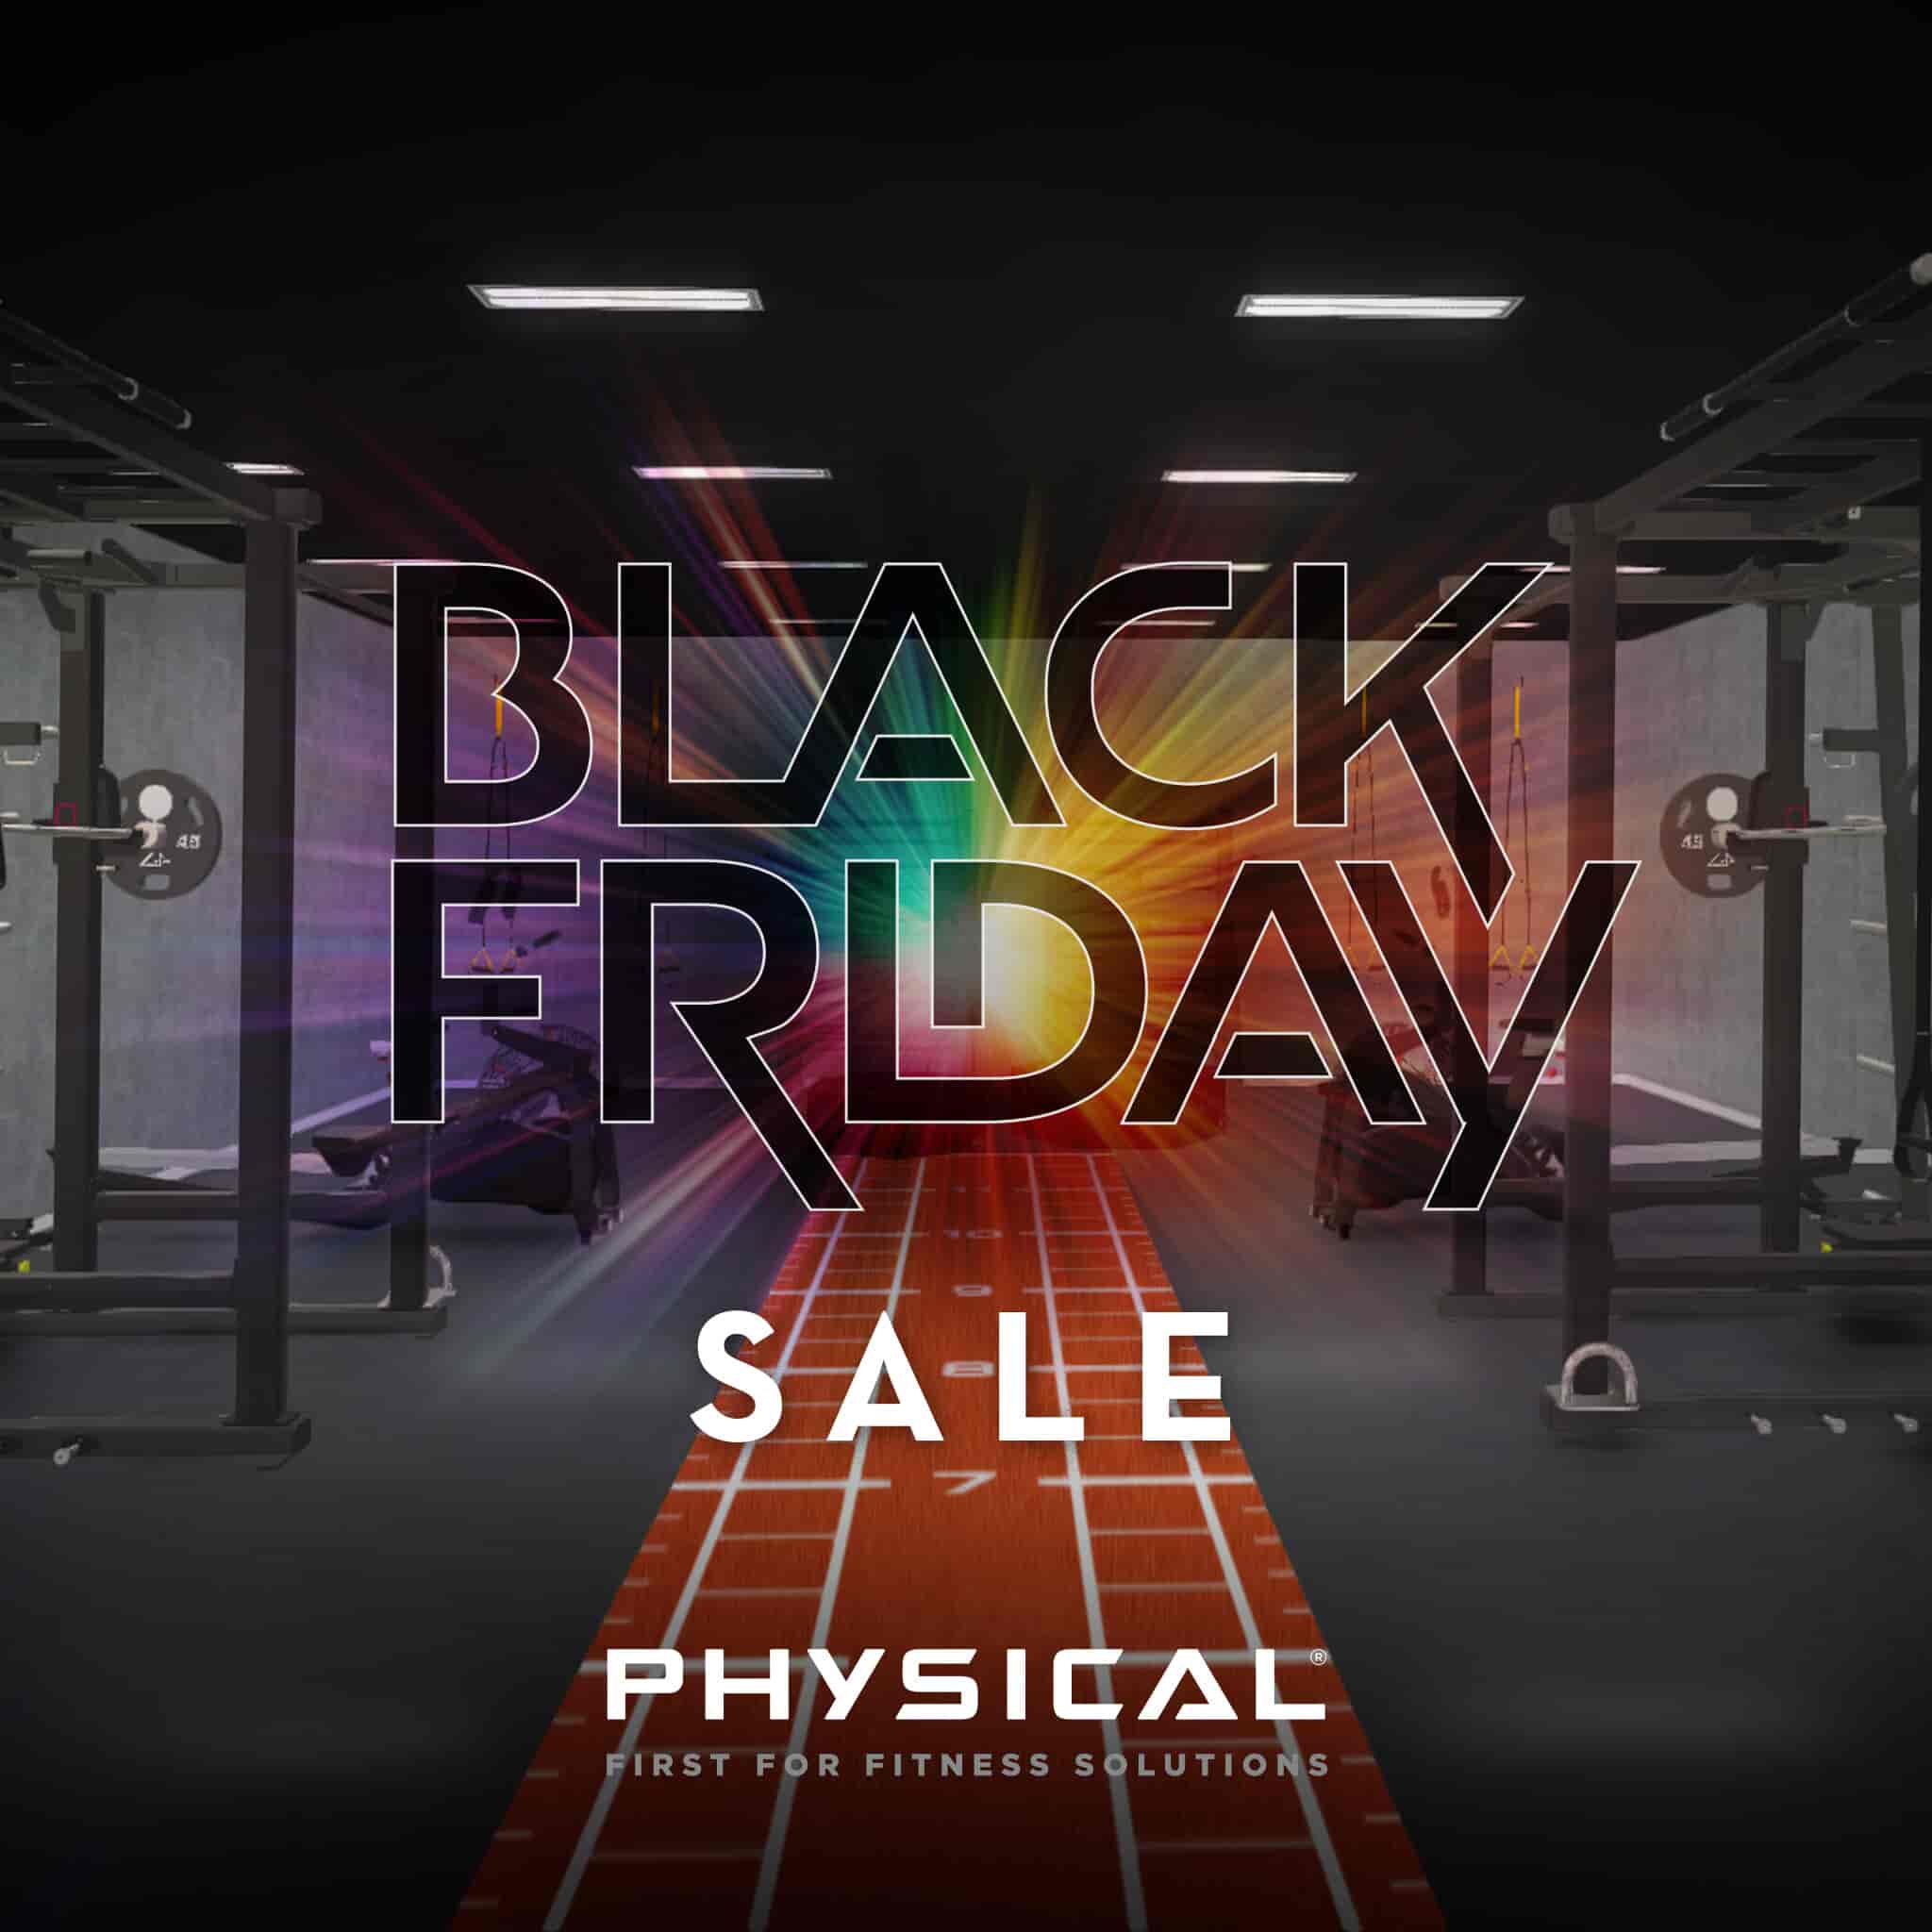 Looking for new gym equipment? Black Friday is here, and you won’t beat Physical’s deals!